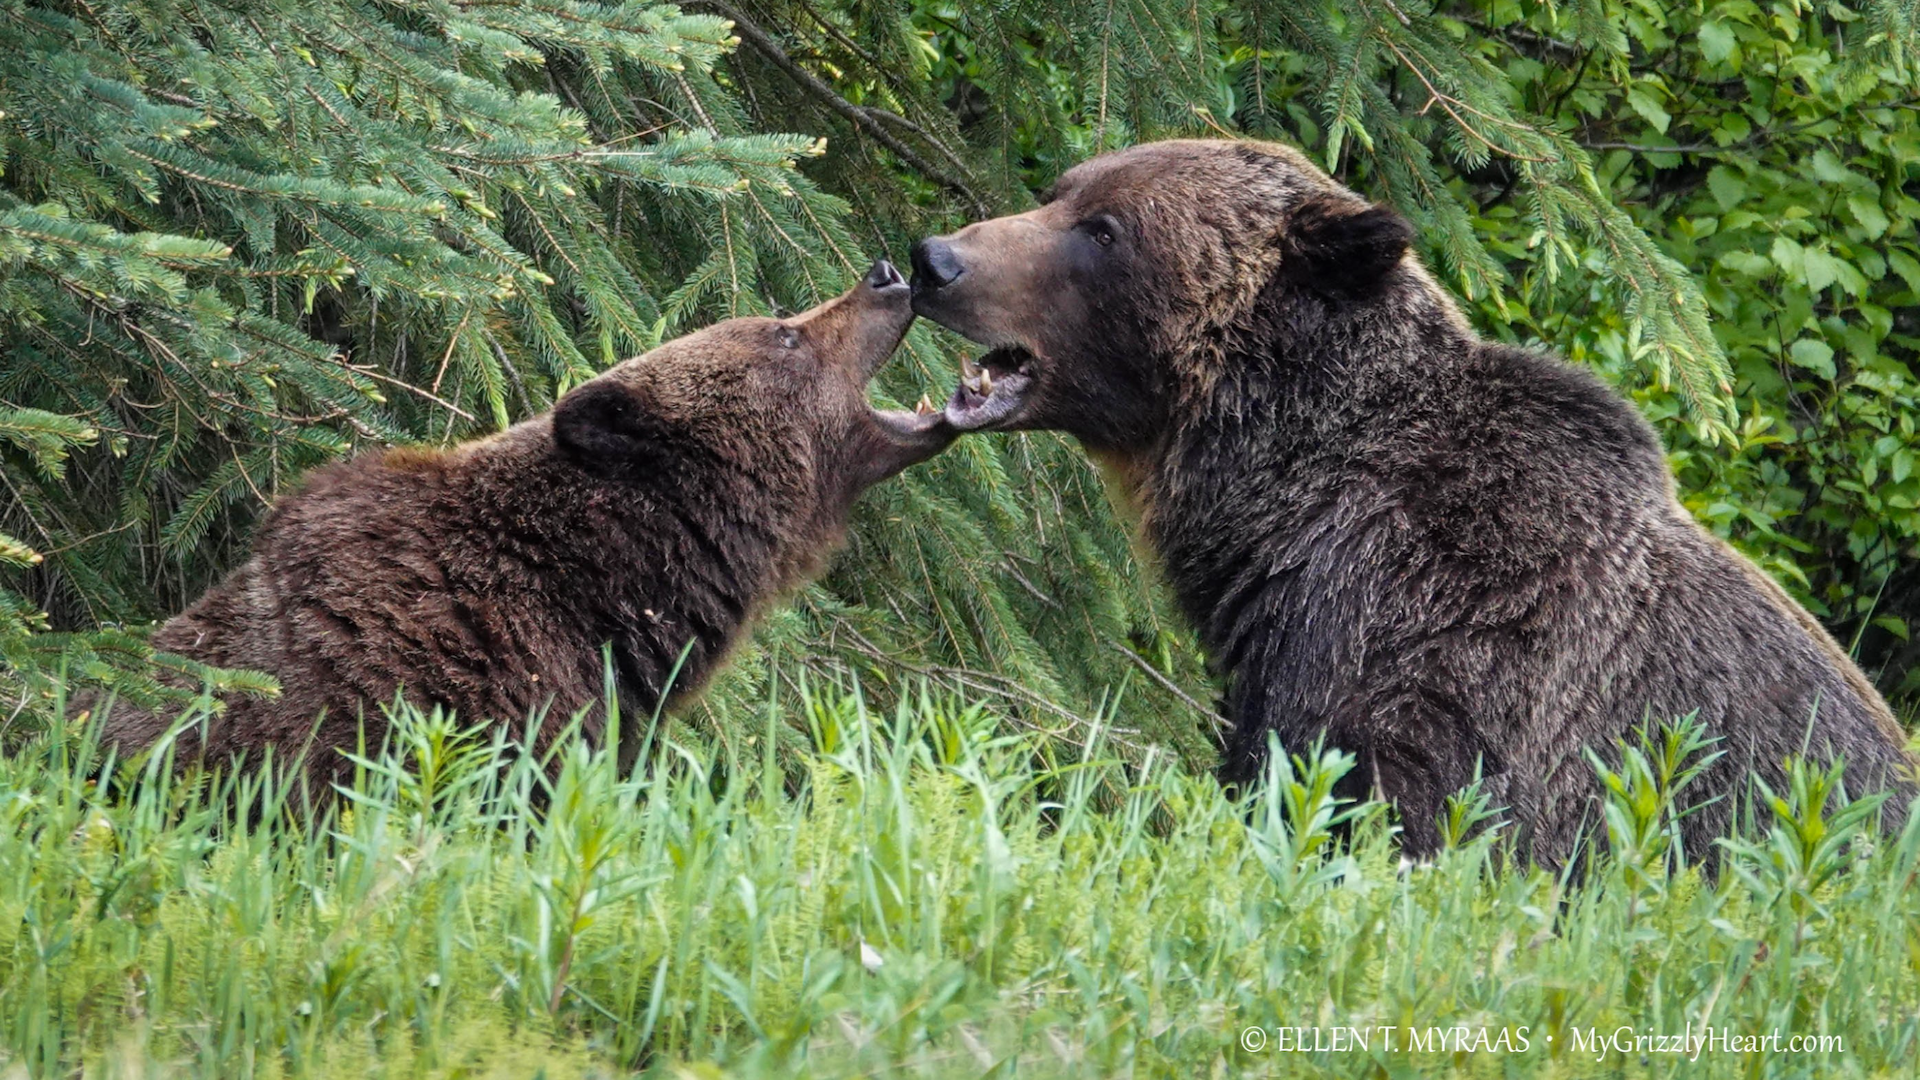 Wildlife Watching Canadian Rockies - Grizzly Bears Mating | Ellen T. Myrass | Total Advantage Travel